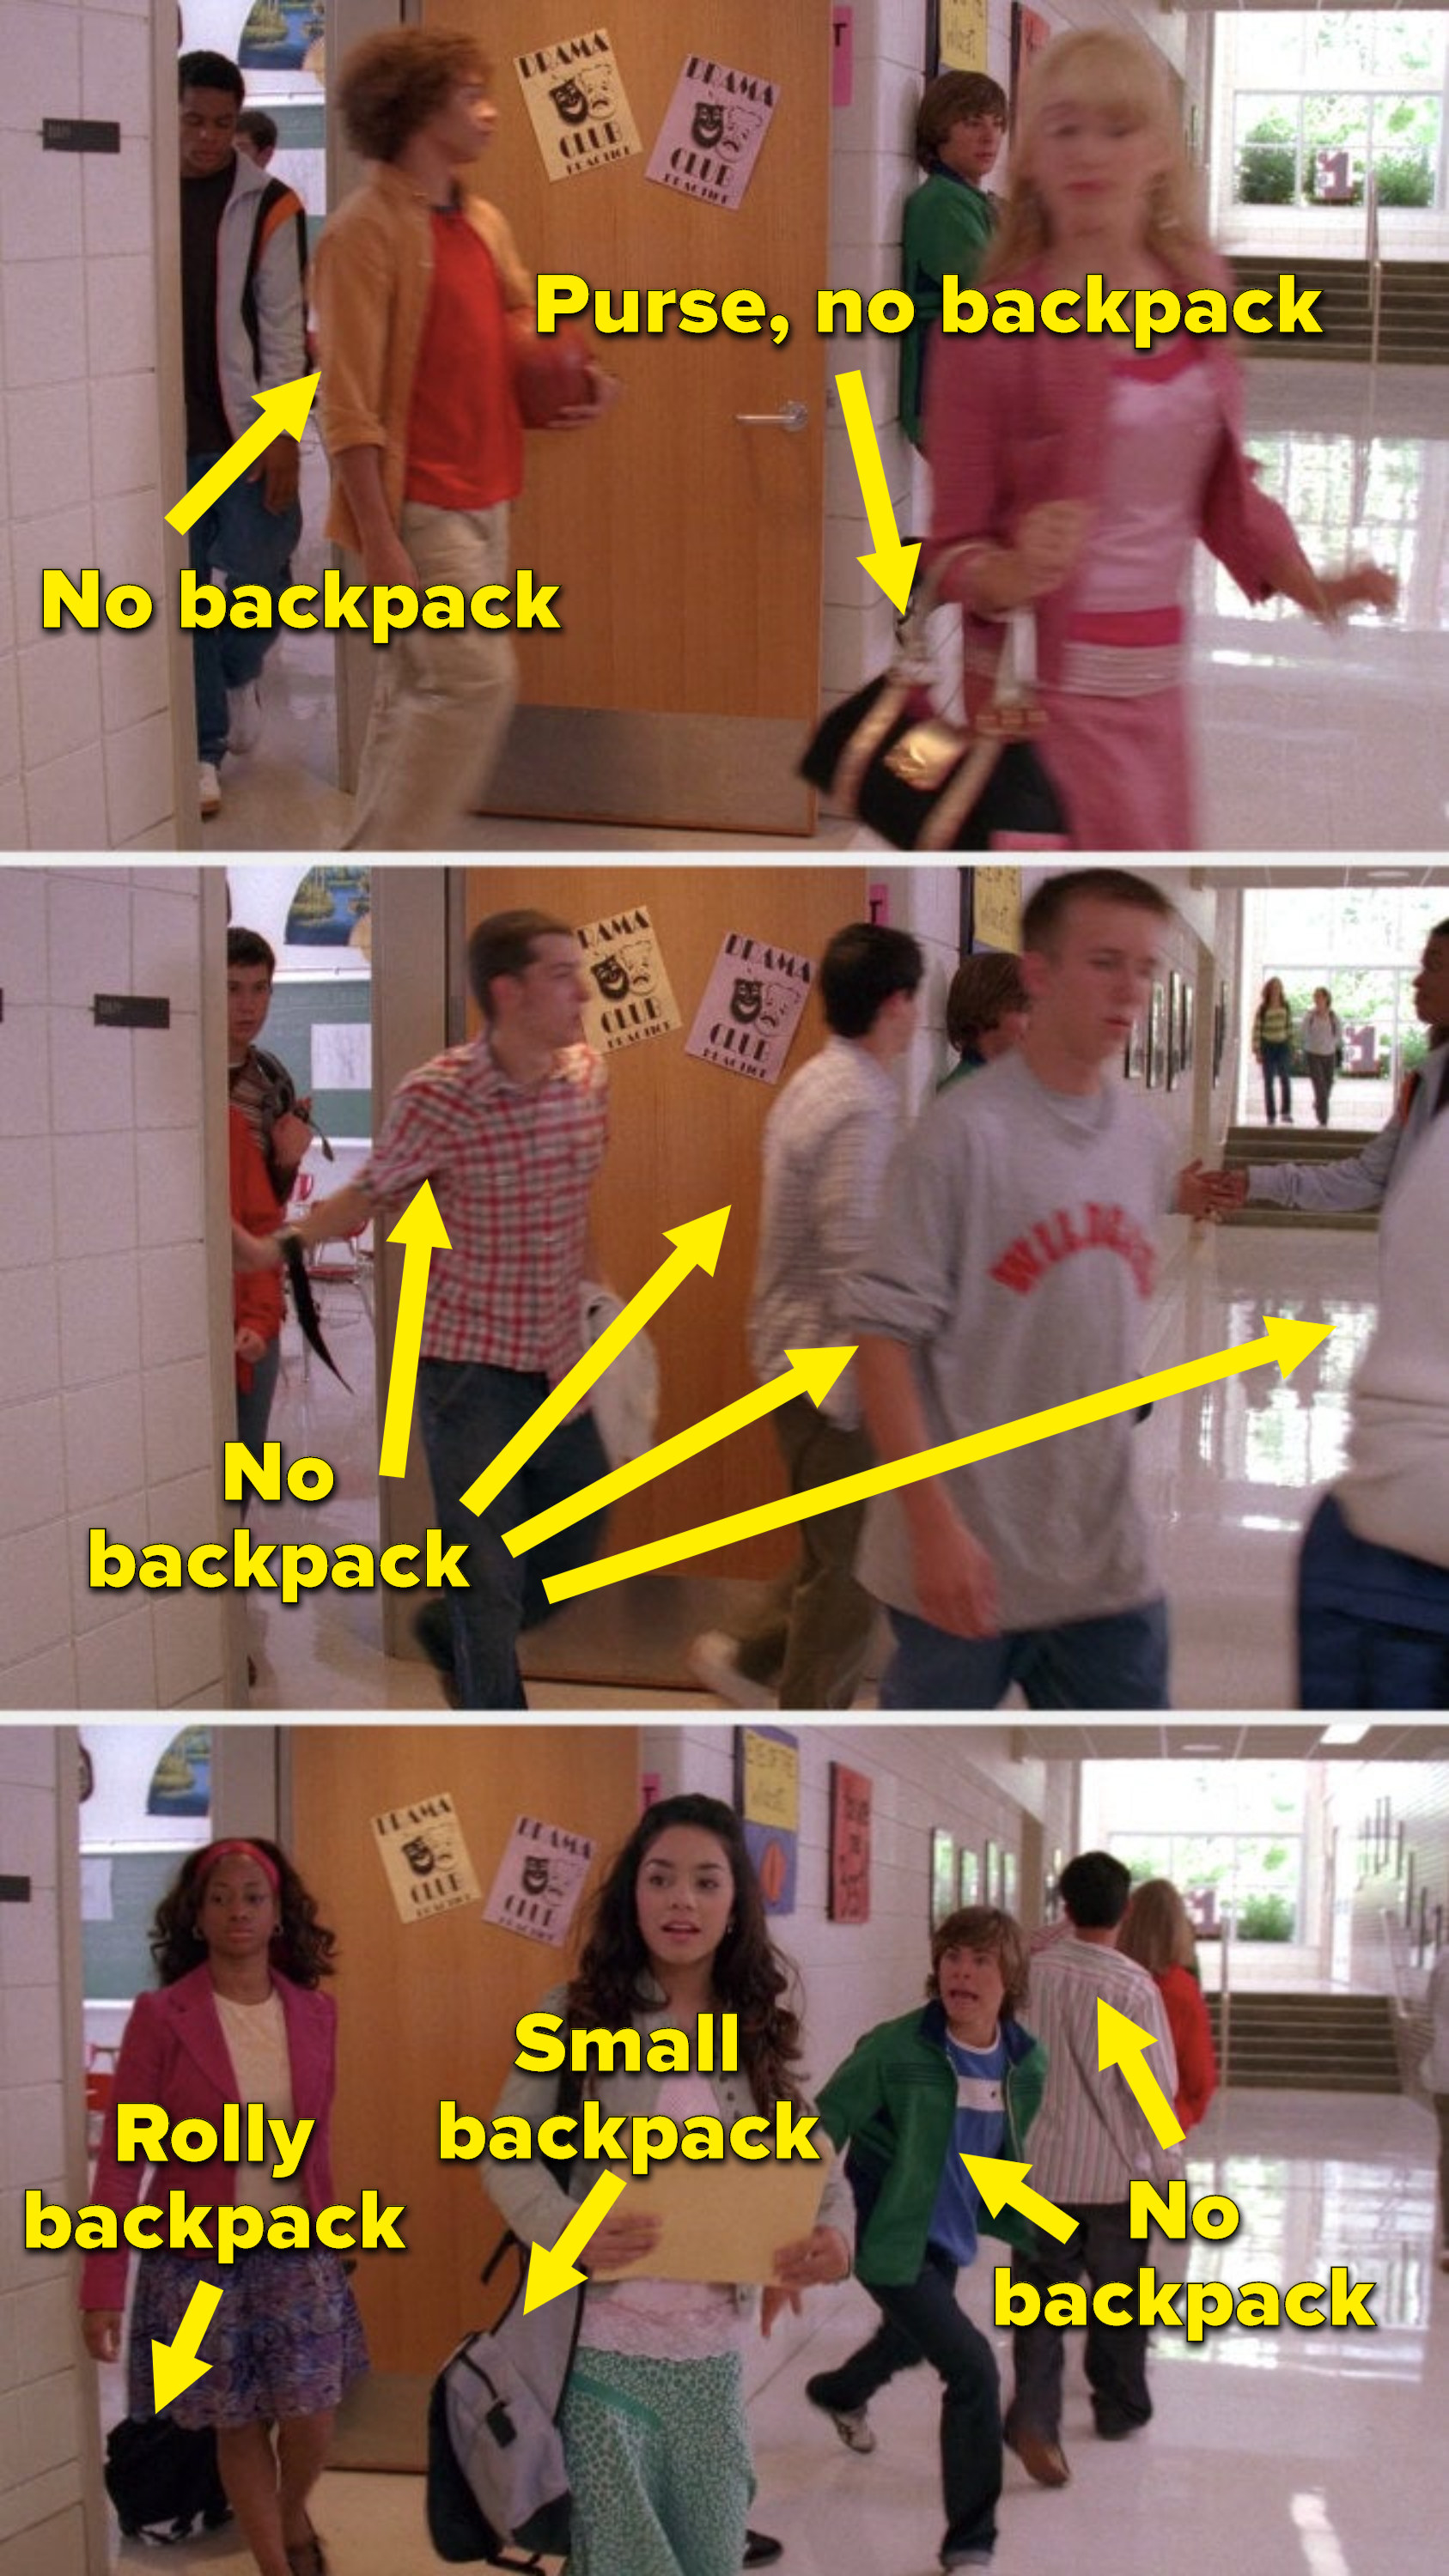 No one but Gabriella and Taylor has a backpack